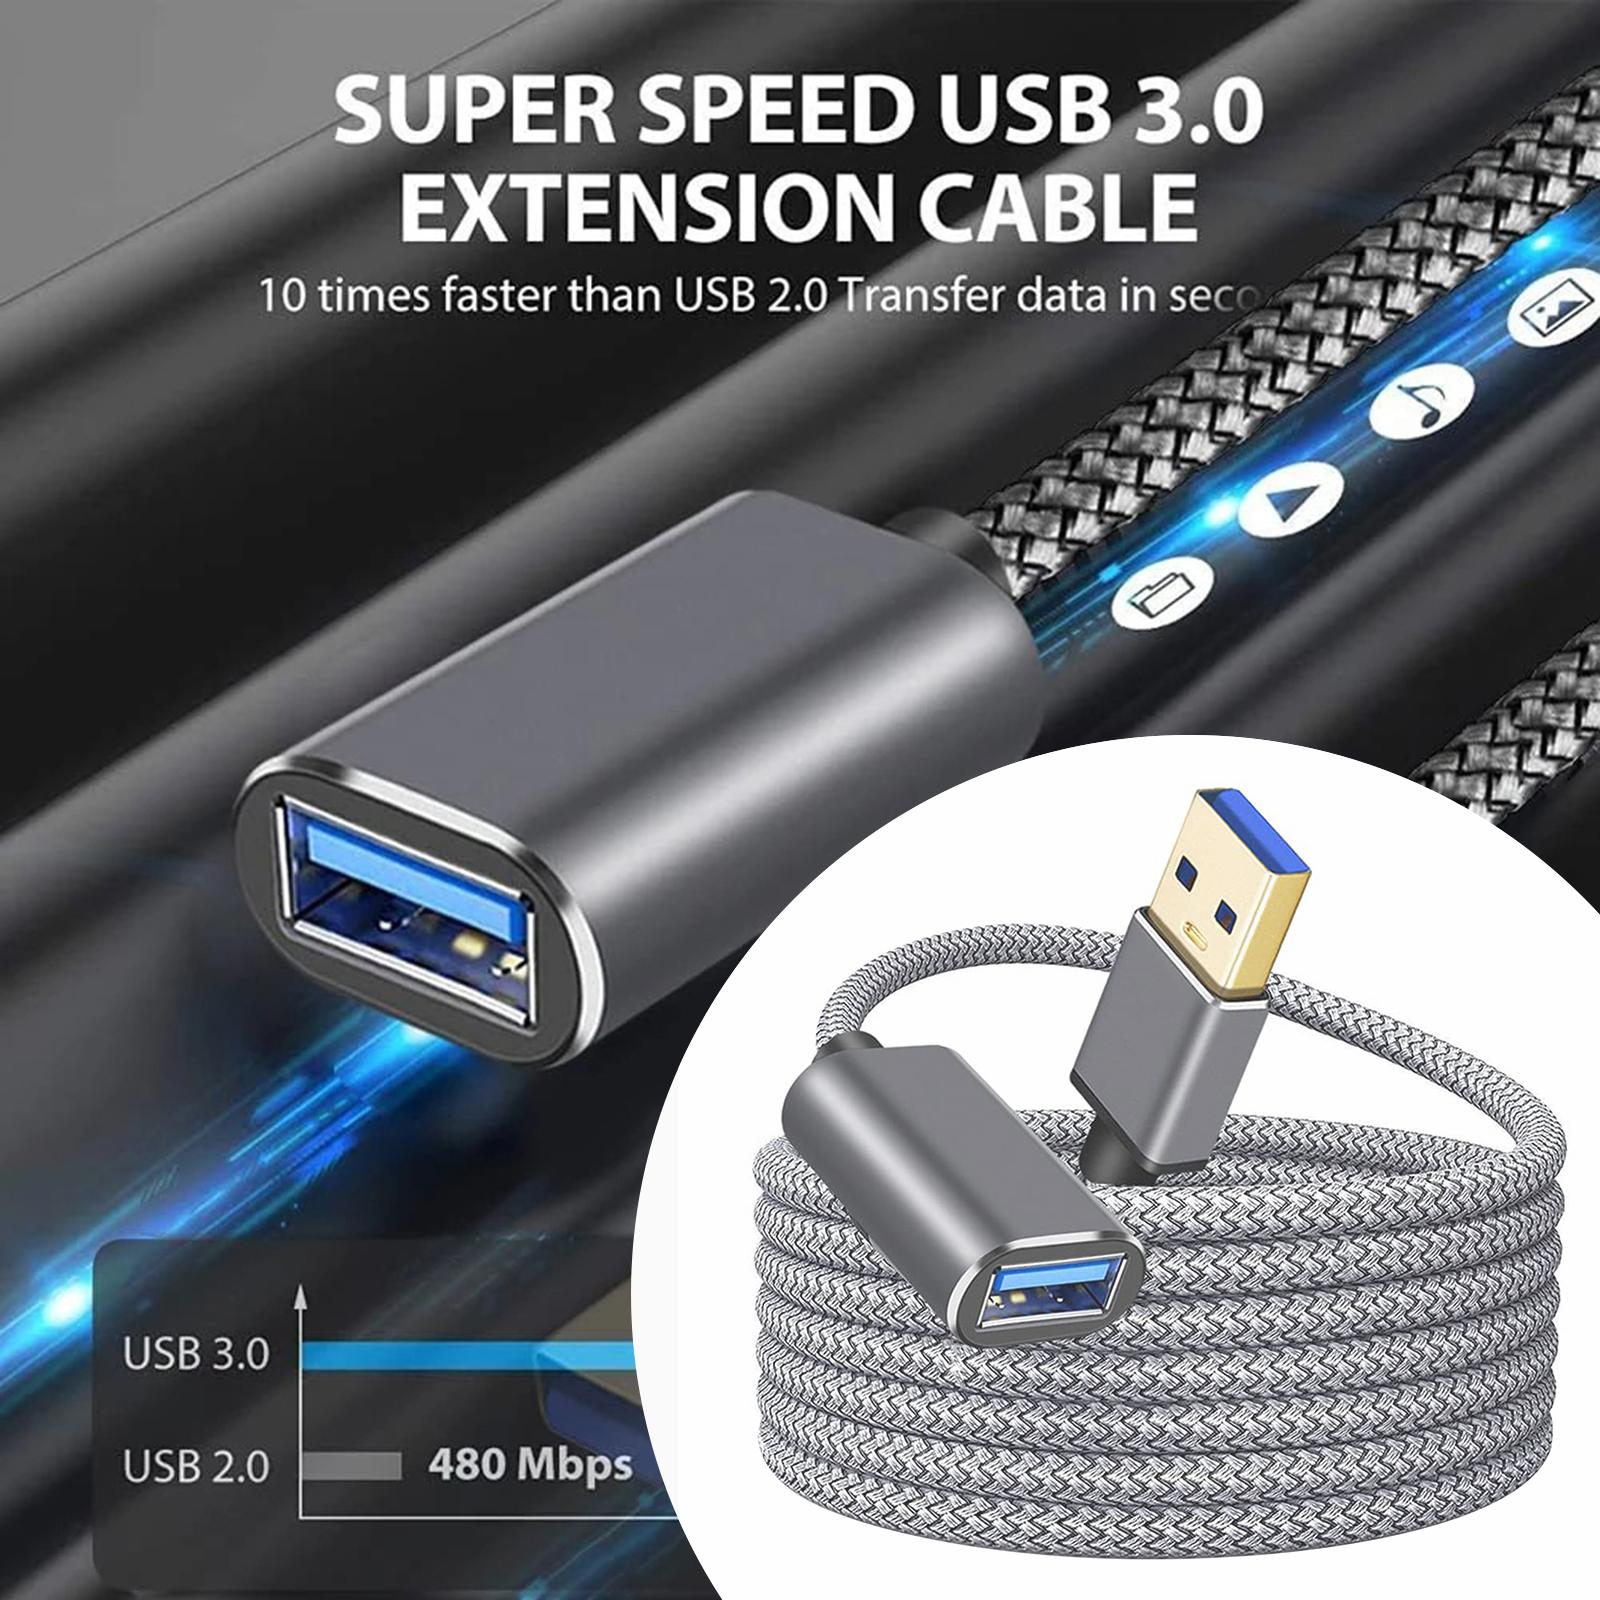 USB 3.0 Extension Cable Durable Portable for USB Hub USB Keyboard 1m